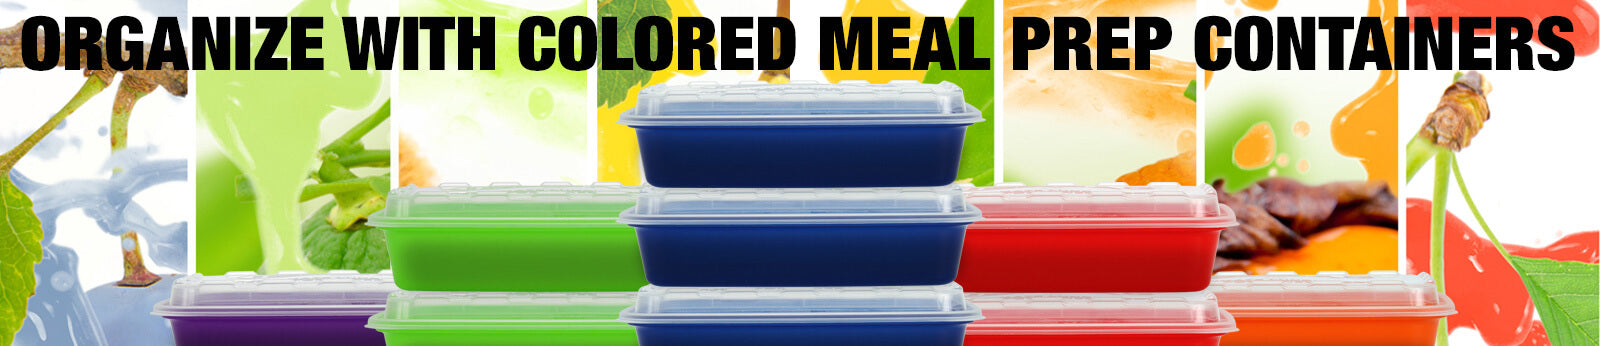 colored meal prep containers